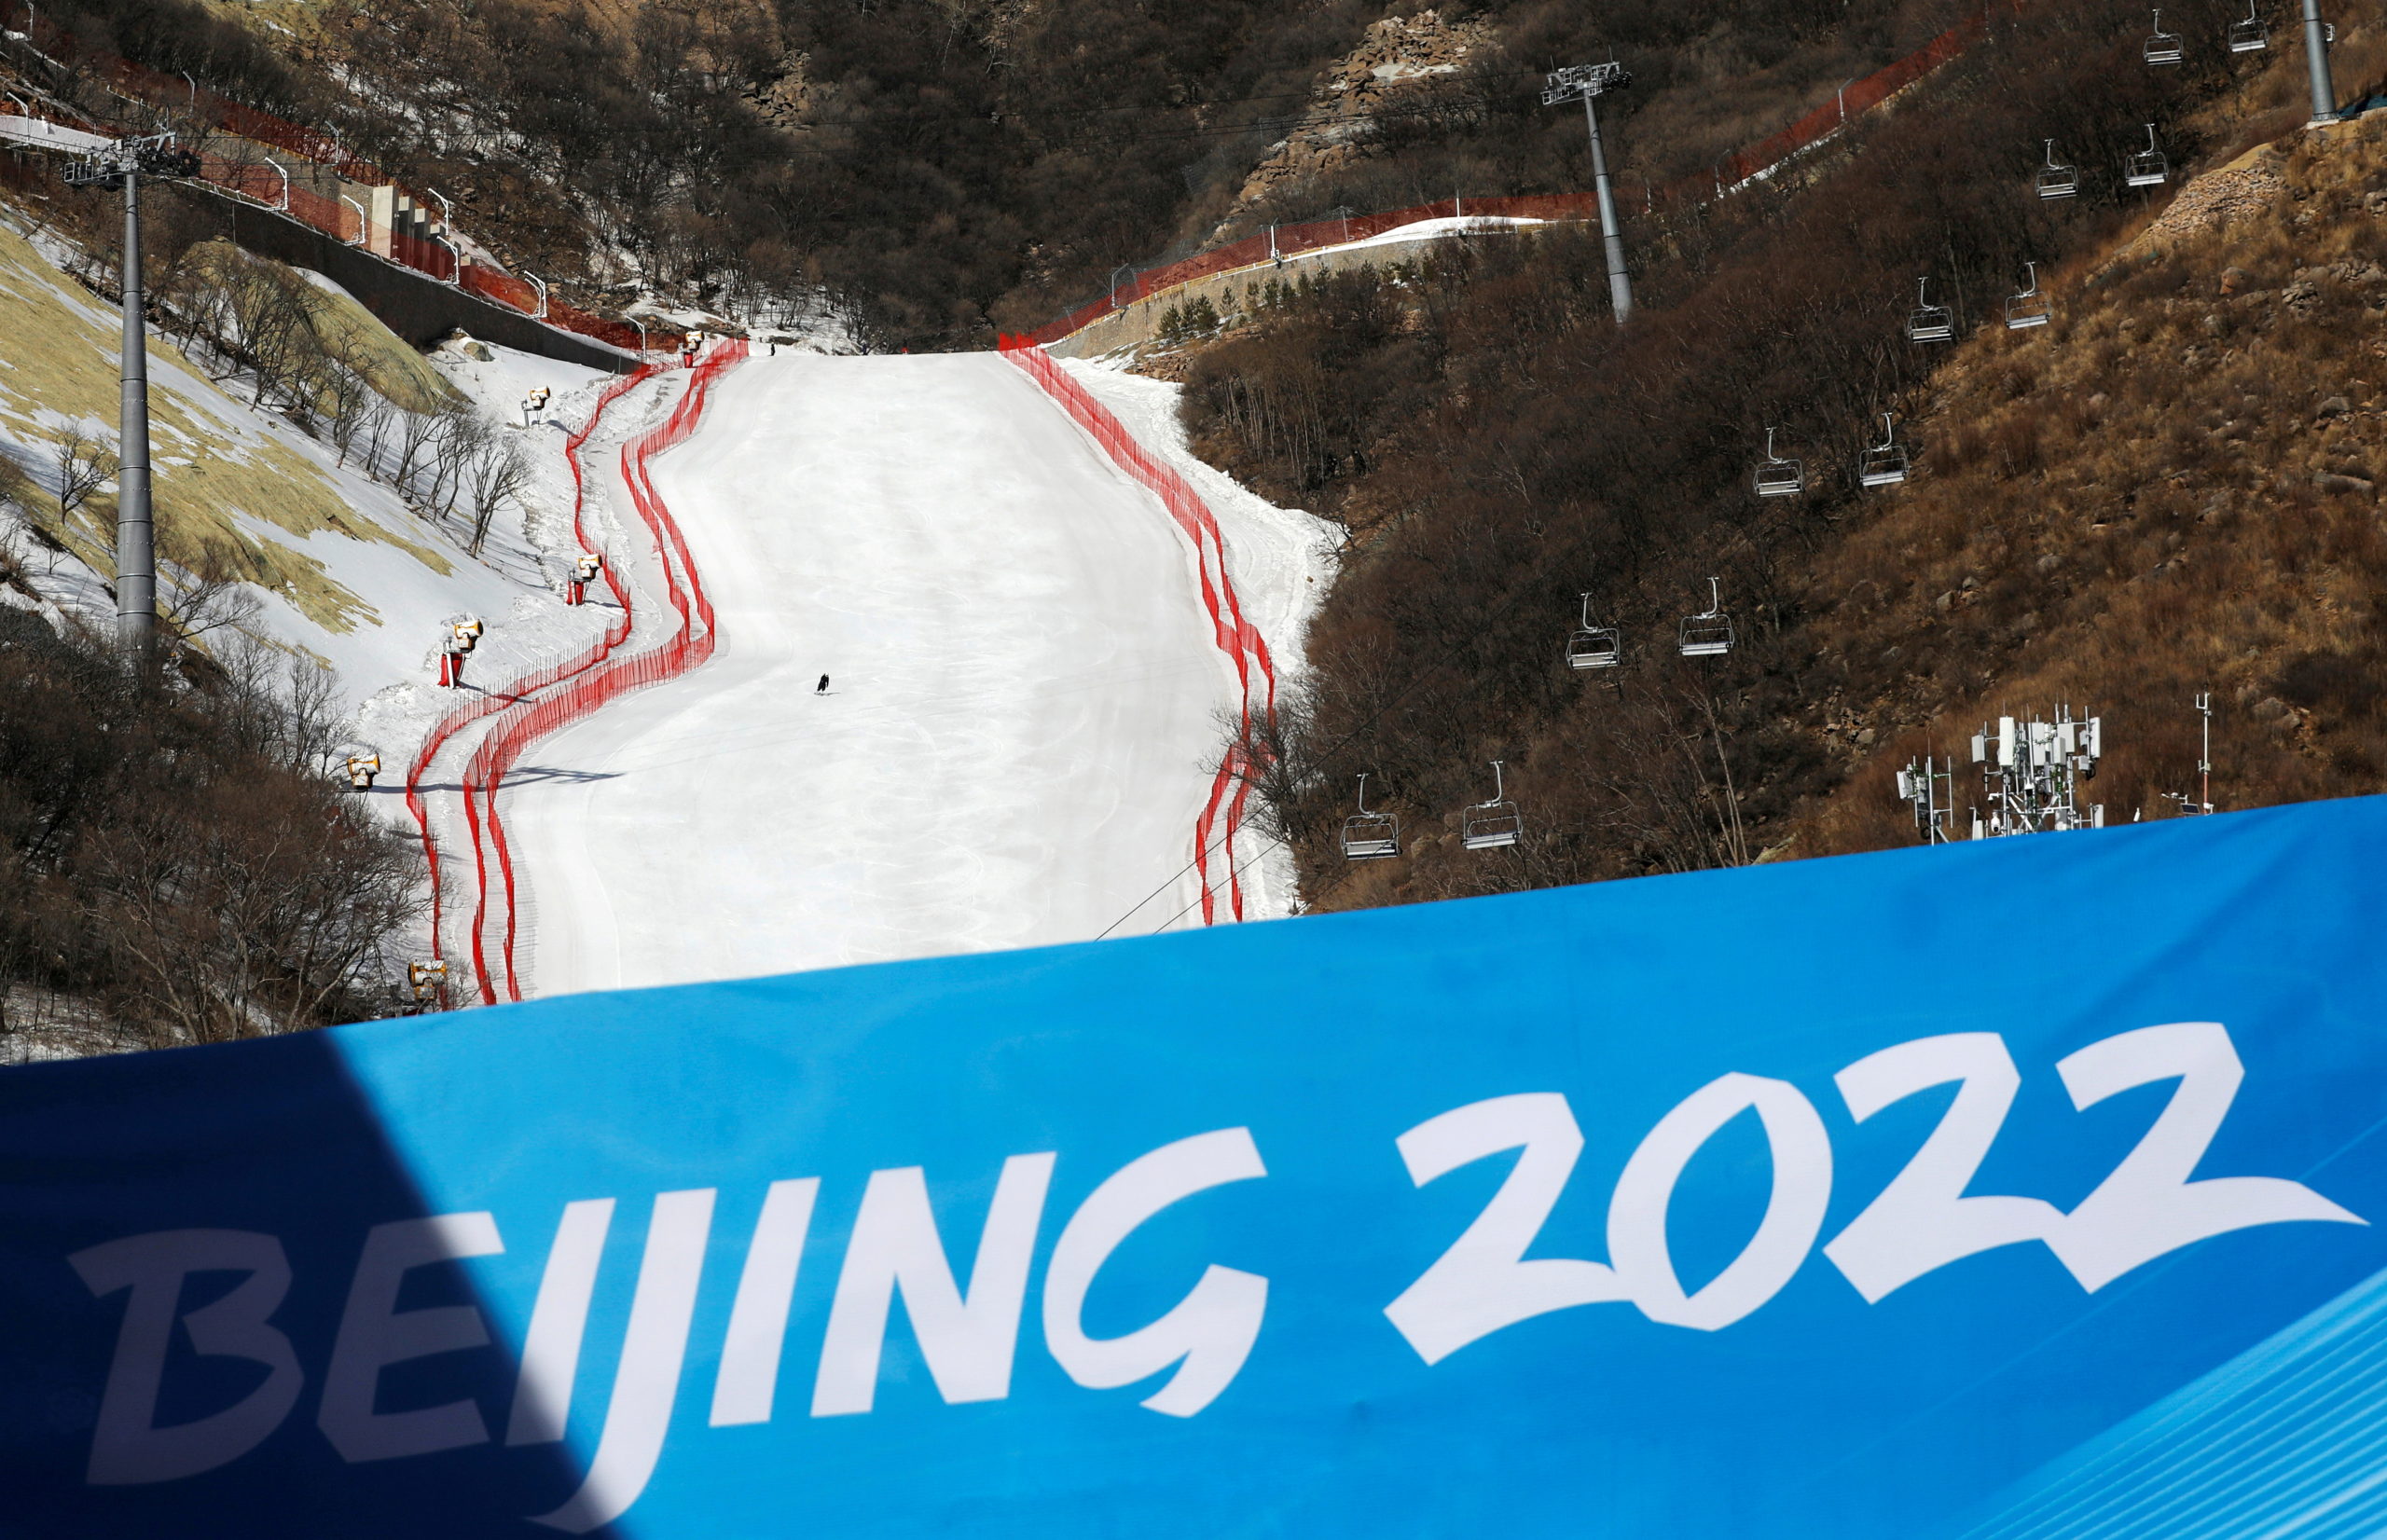 FILE PHOTO: A staff member skis down a slope during an organised media tour to the National Alpine Skiing Centre, a venue of the 2022 Winter Olympic Games, in Beijing's Yanqing district, China February 5, 2021. REUTERS/Tingshu Wang/File Photo